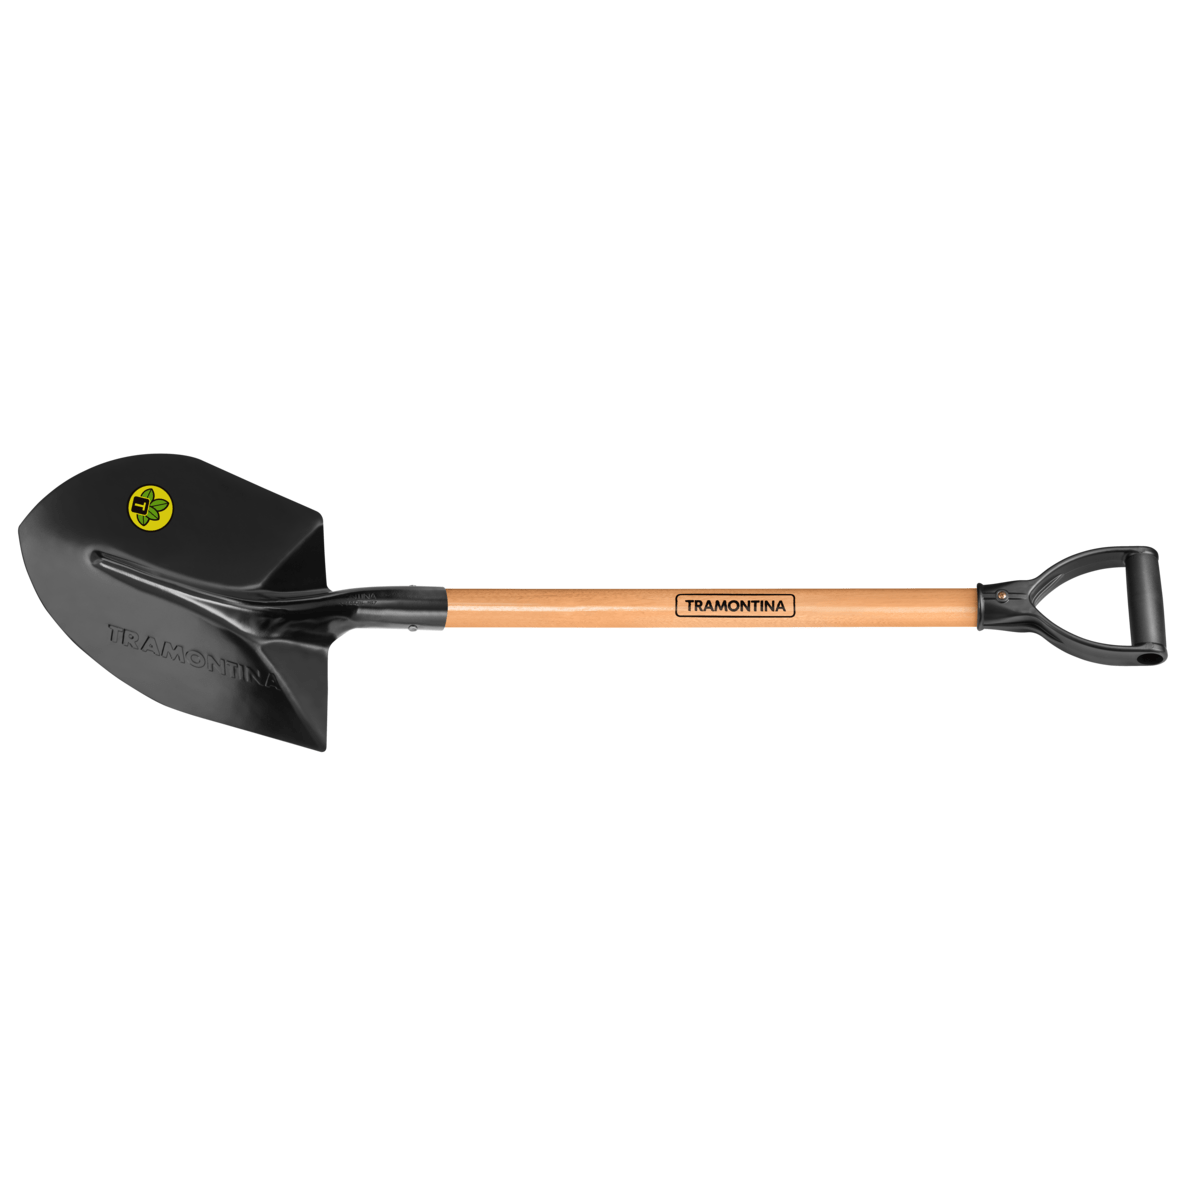 Tramontina Round Mouth Shovel with 71cm Wooden Handle | Supply Master | Accra, Ghana Tools Building Steel Engineering Hardware tool